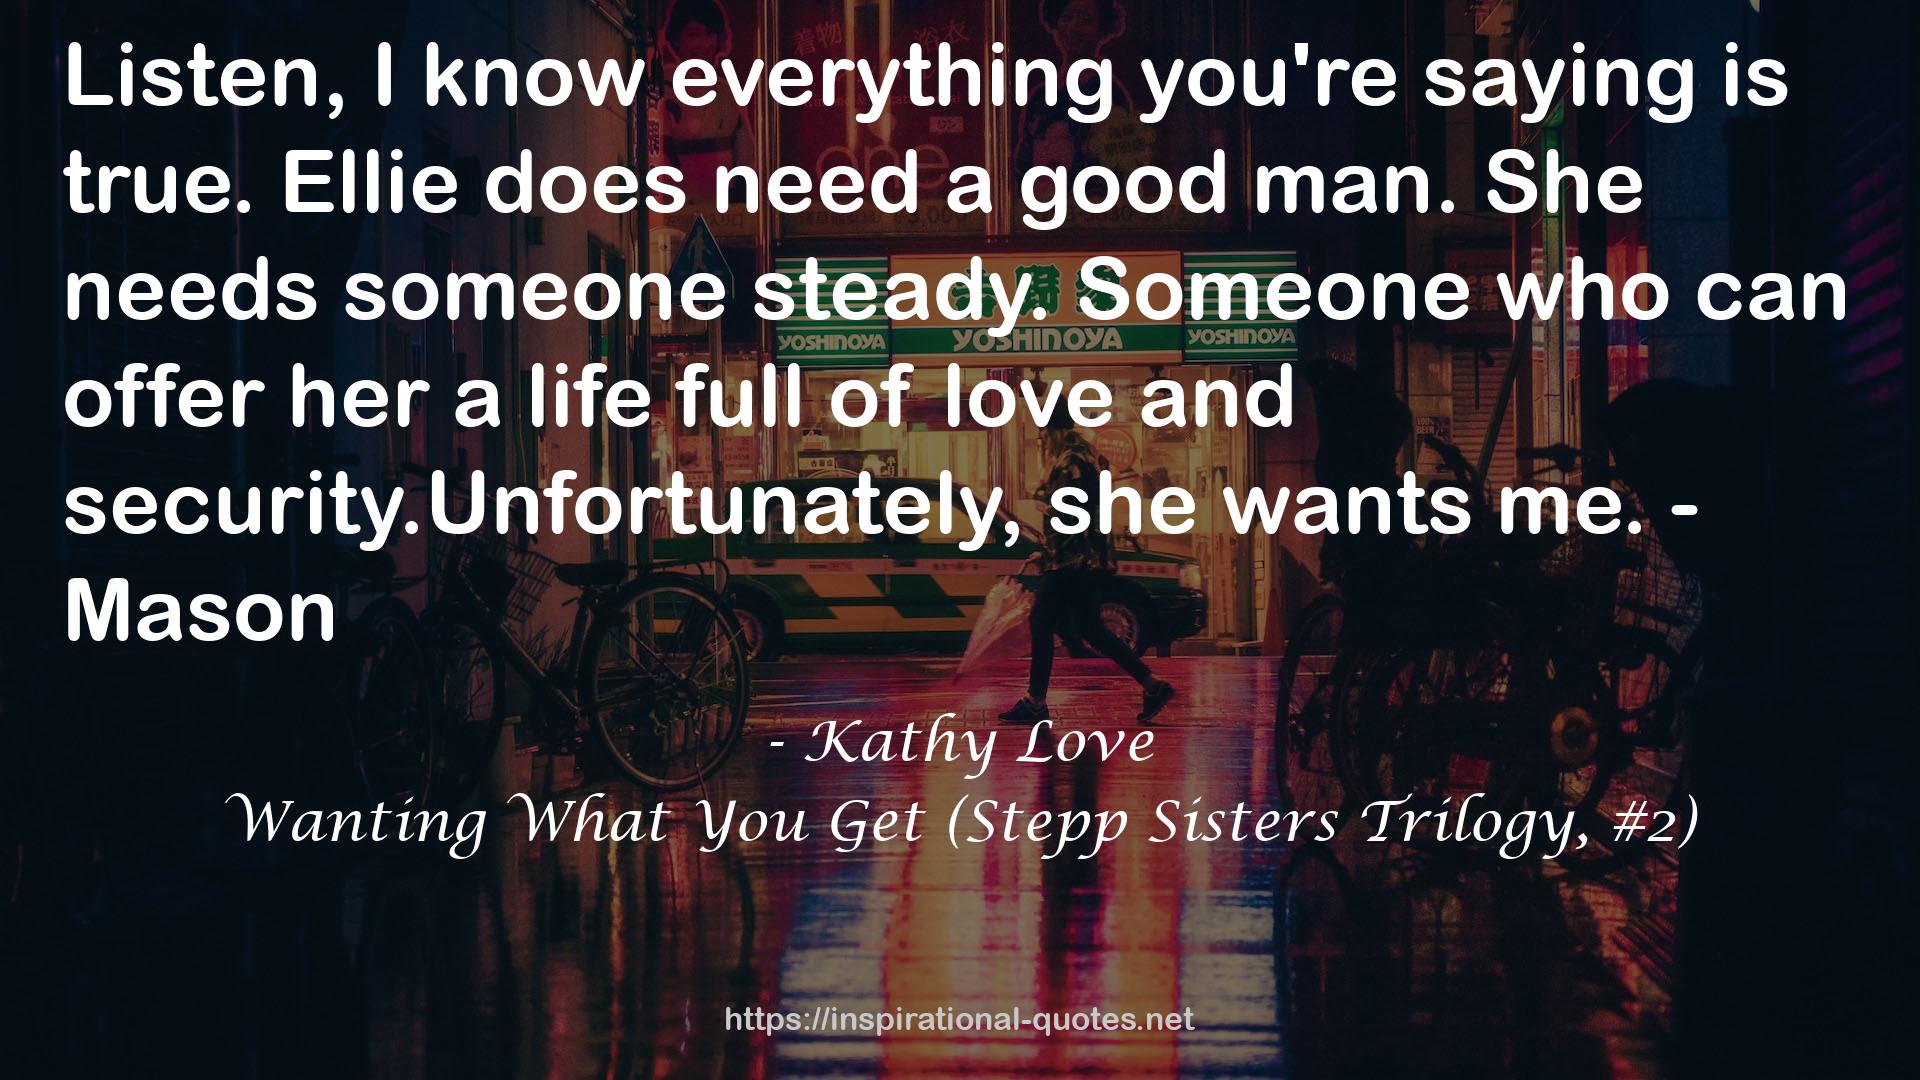 Wanting What You Get (Stepp Sisters Trilogy, #2) QUOTES